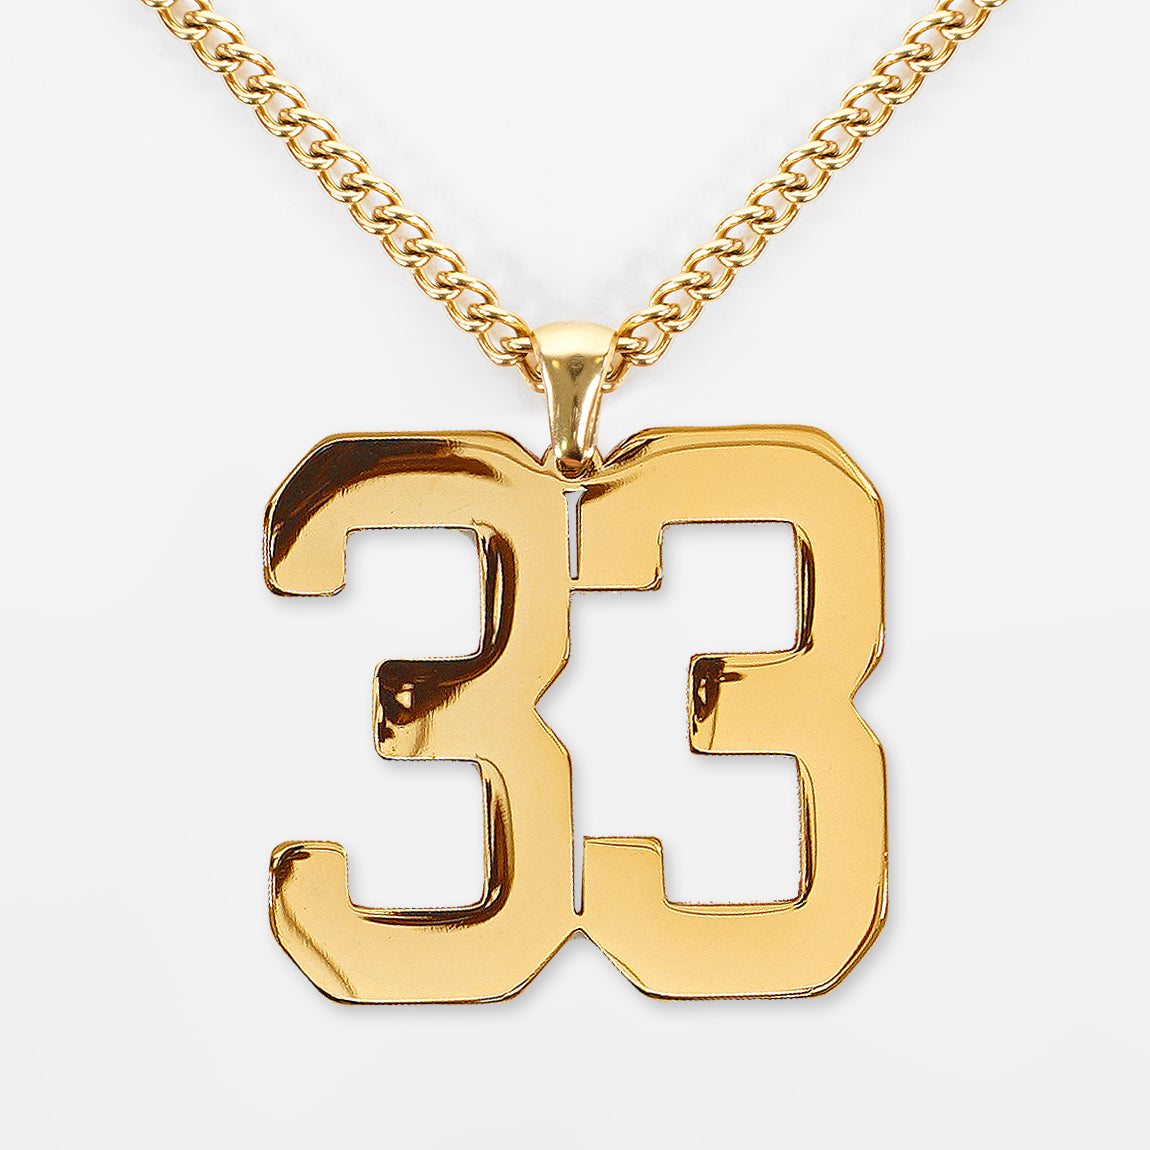 33 Number Pendant with Chain Necklace - Gold Plated Stainless Steel